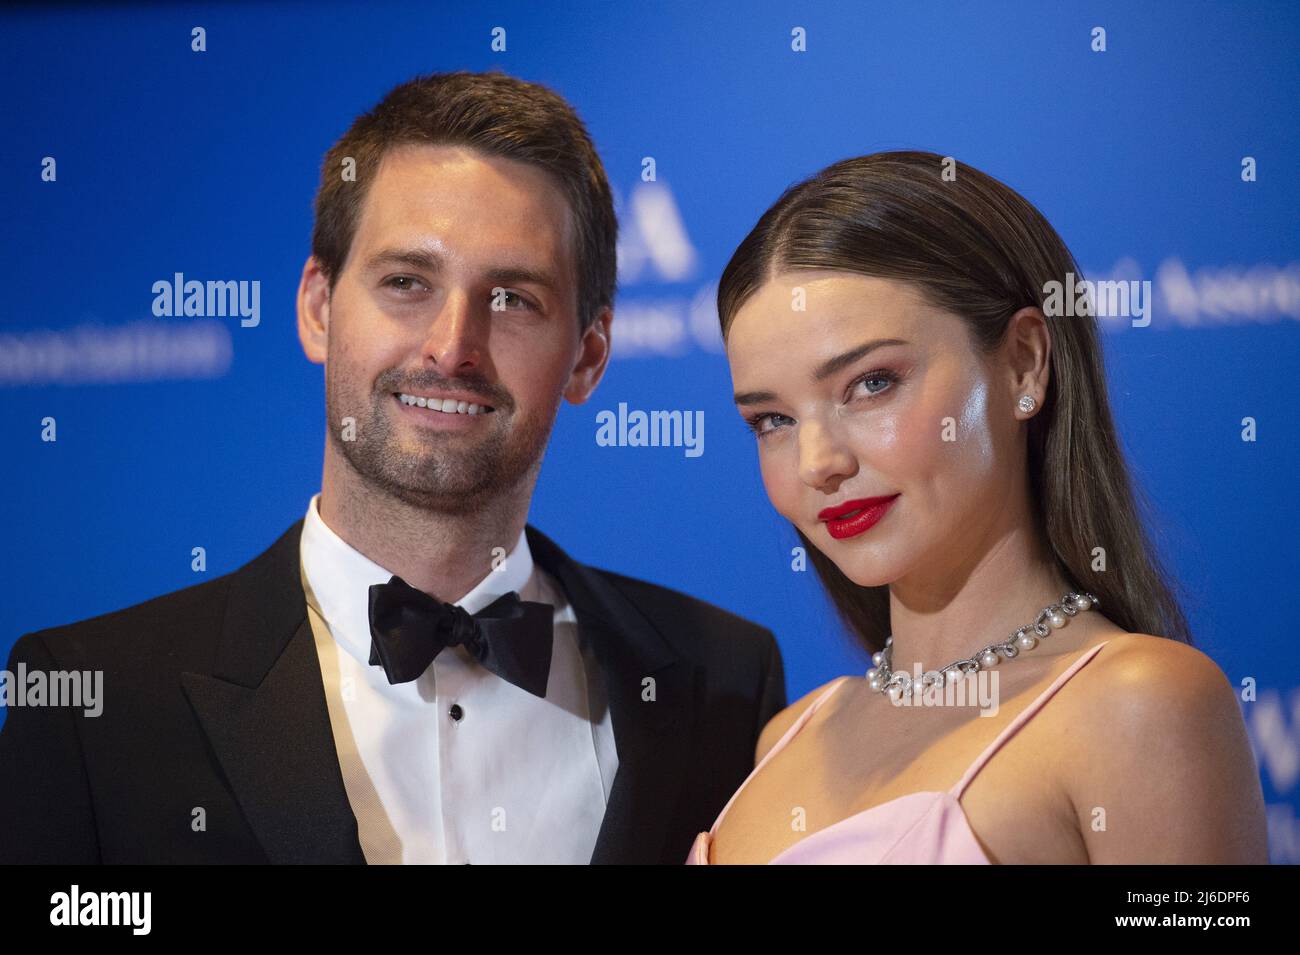 Australian Model Miranda Kerr and Evan Spiegel arrive at the 2022 White House Correspondents' Association Dinner at the Washington Hilton in Washington, DC on Saturday, April 30, 2022. The dinner is back this year for the first time since 2019. Photo by Bonnie Cash/UPI.... . Stock Photo